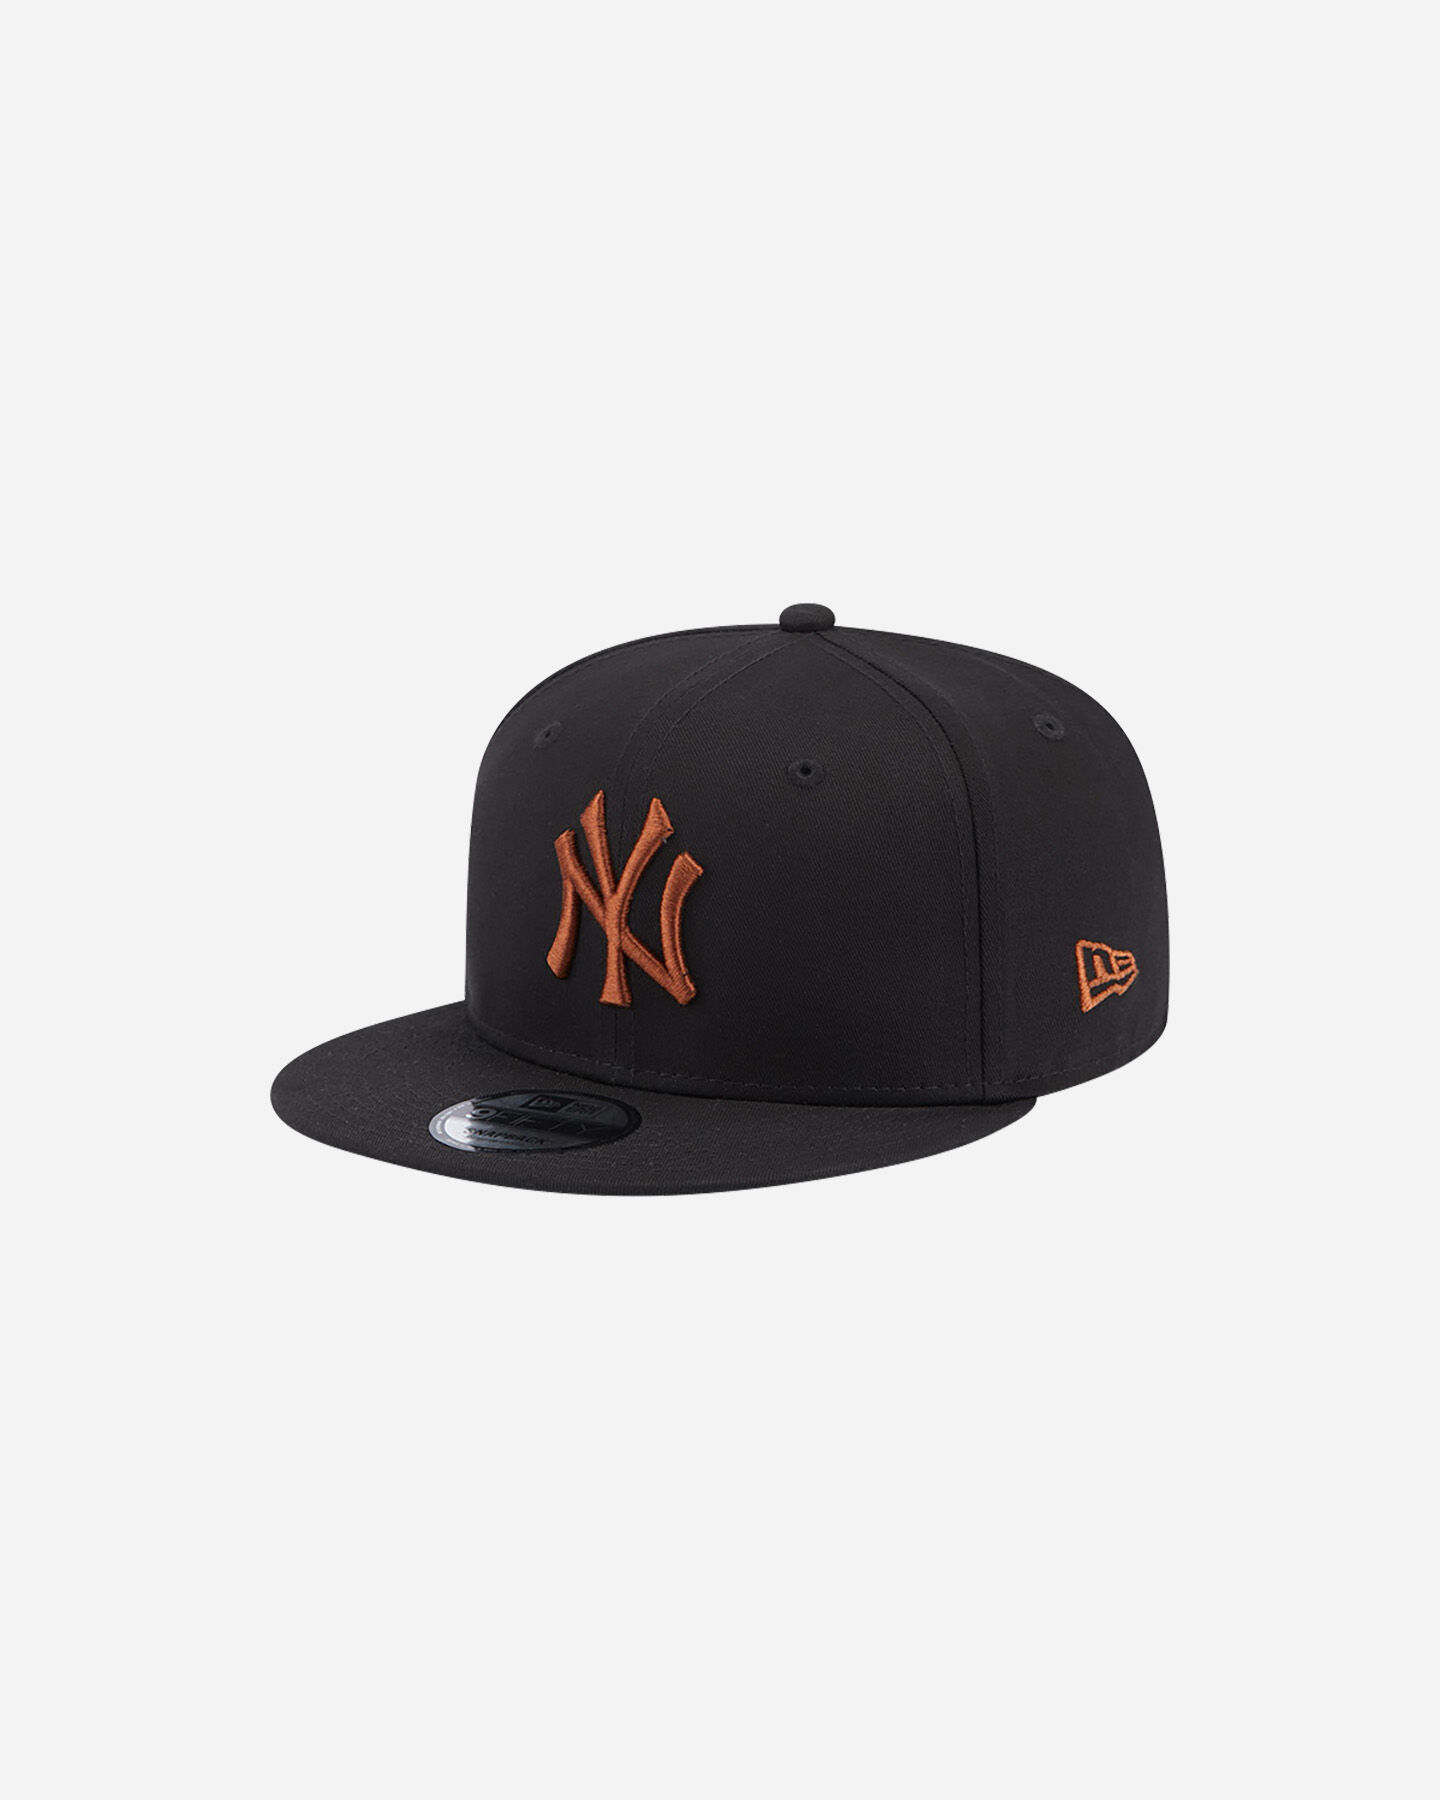  Cappellino NEW ERA 9FIFTY MLB LEAGUE NEW YORK YANKEES  S5606265|001|SM scatto 0